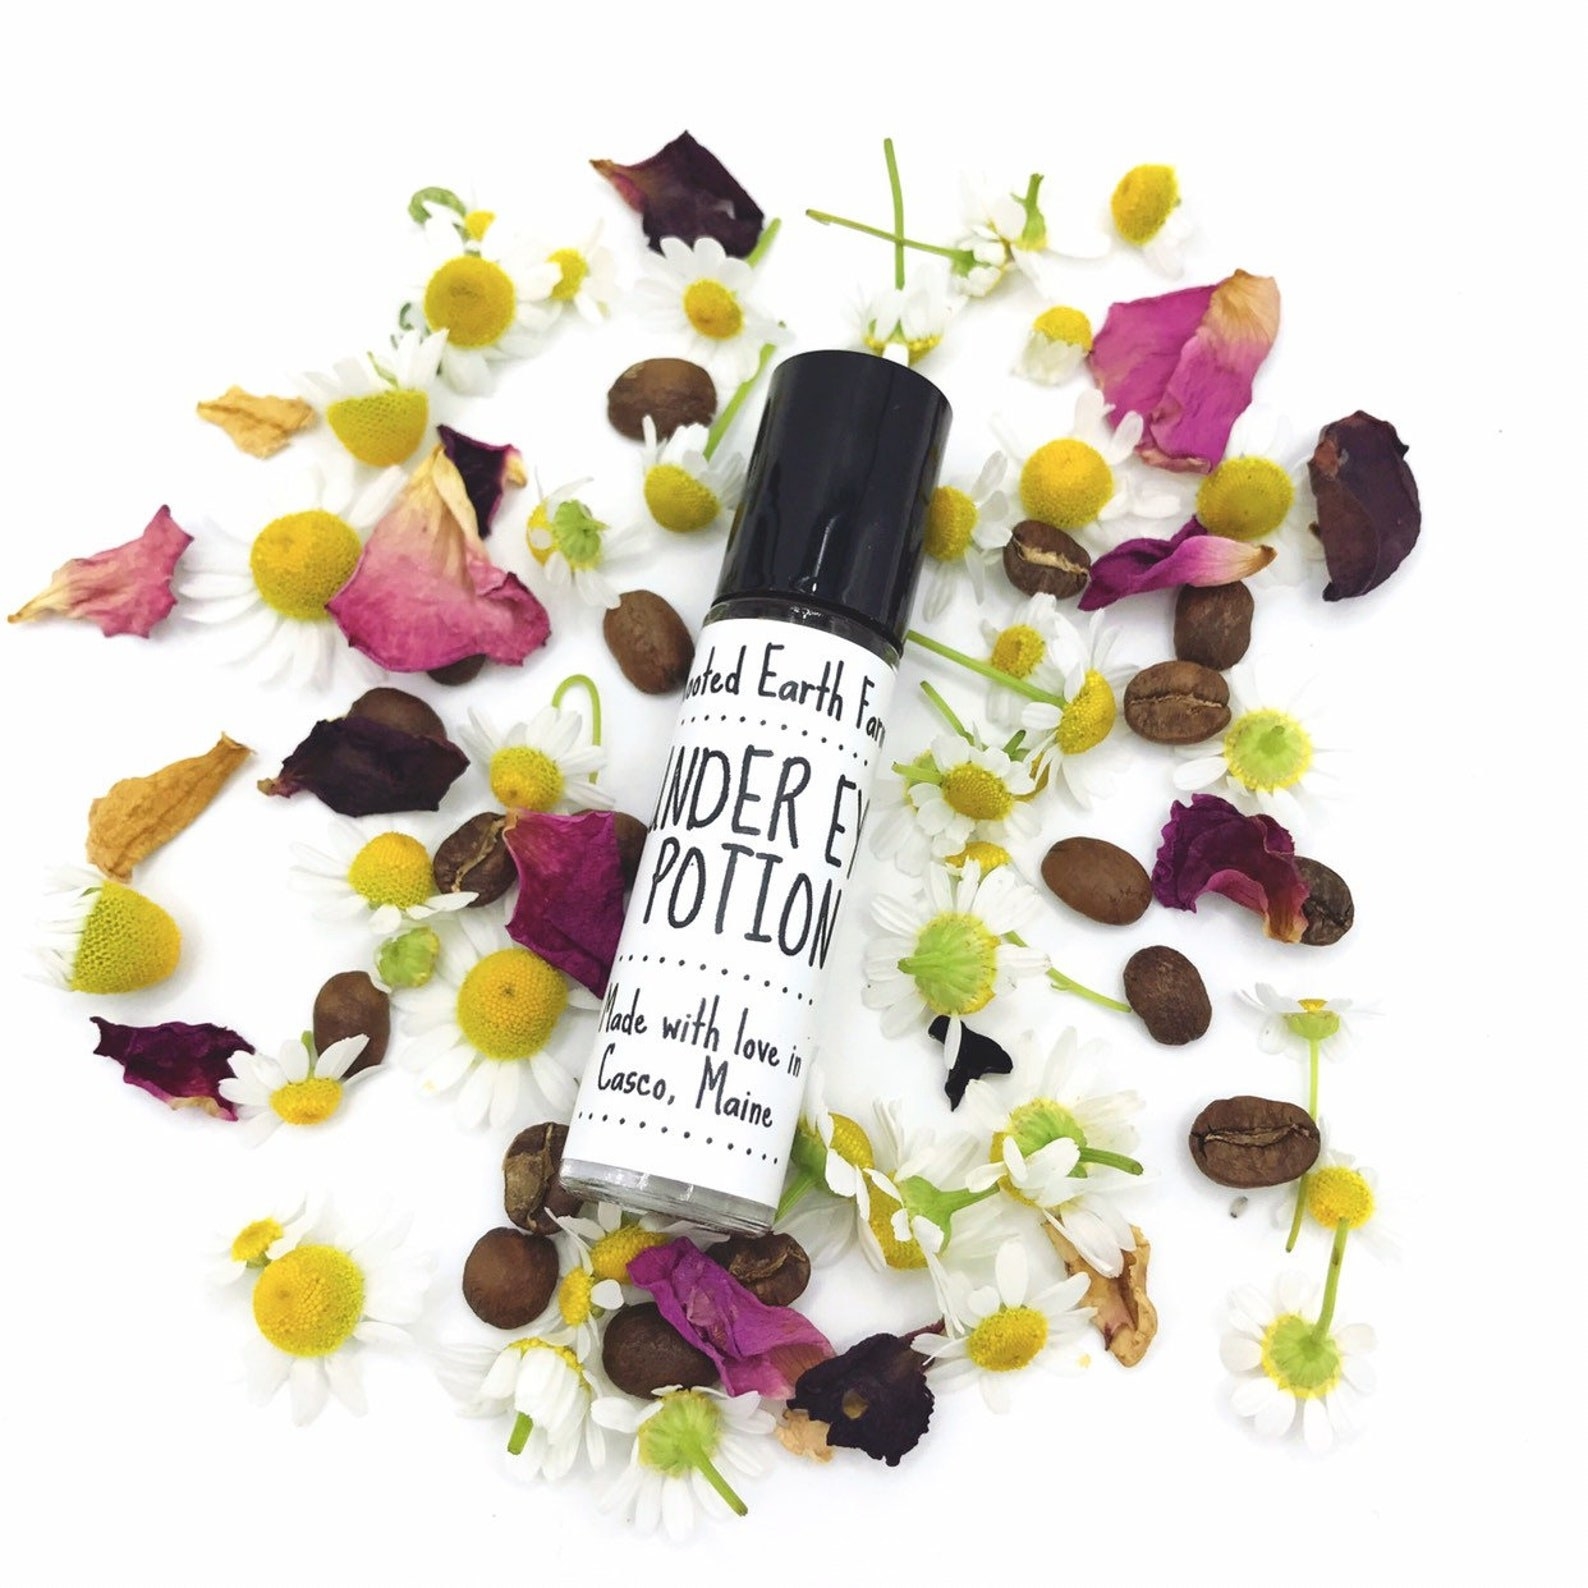 Bottle of Under Eye Potion by Rooted Earth